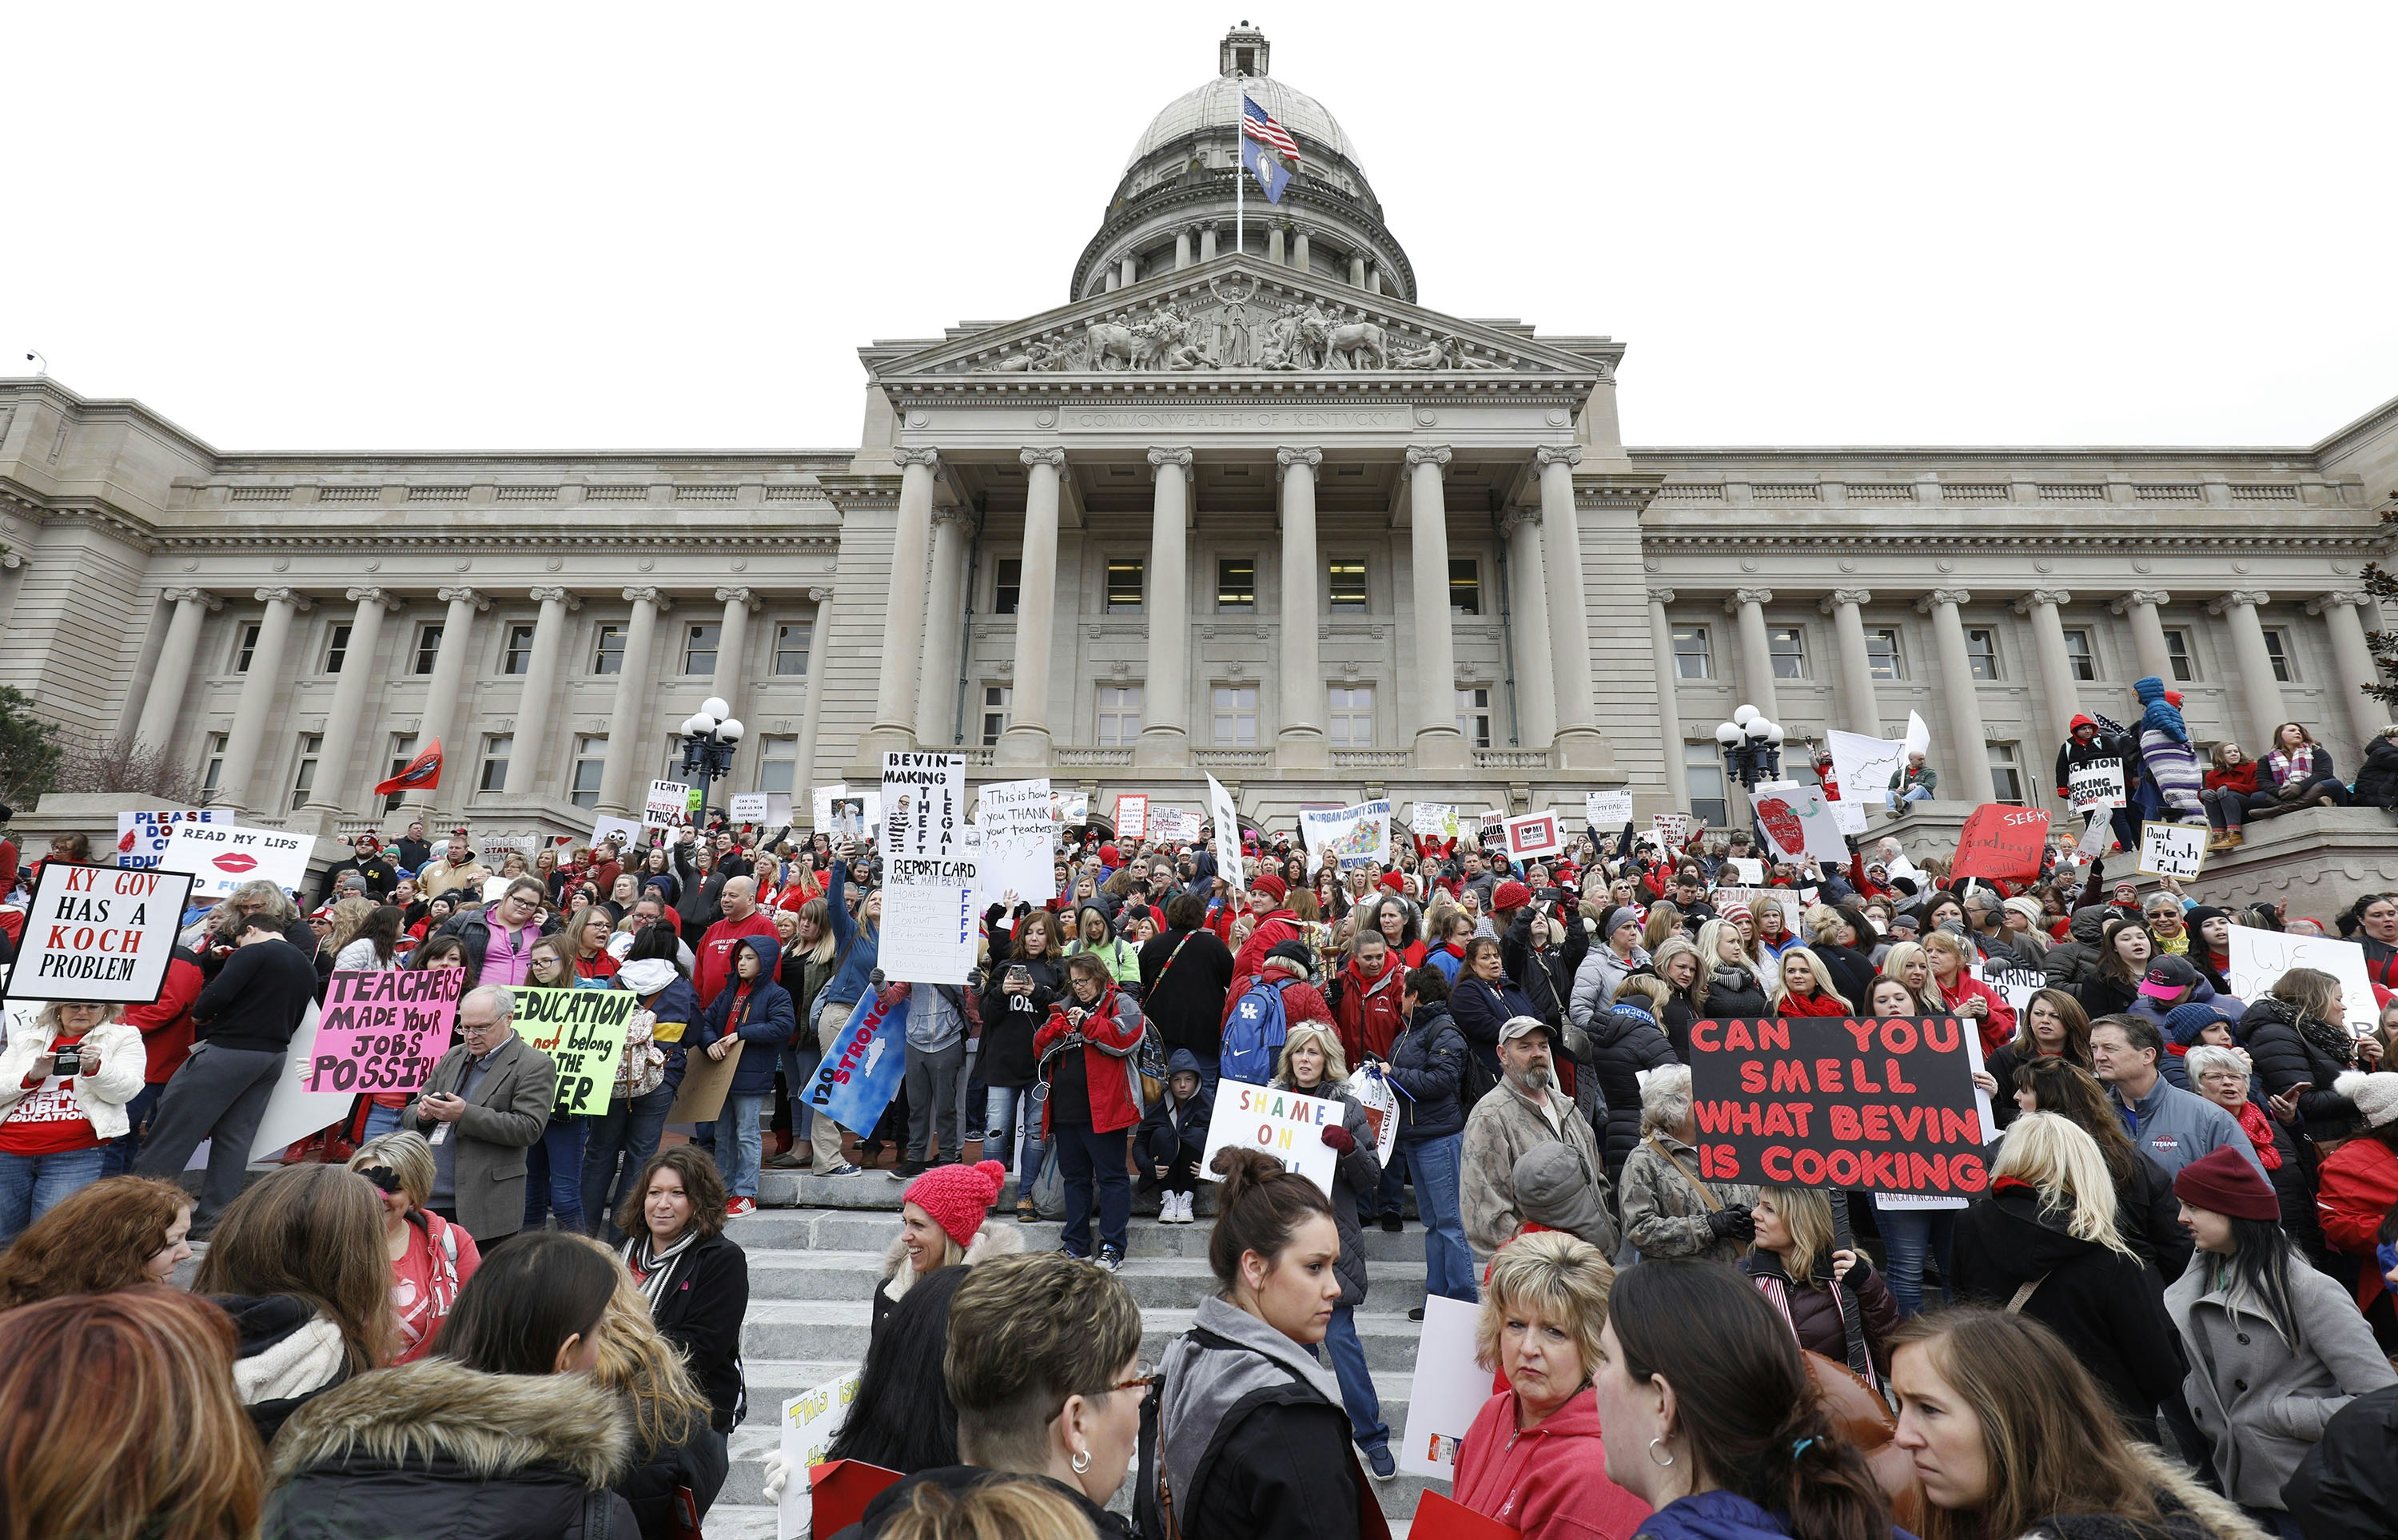 FRANKFORT, KY - APRIL 2: Thousands of public school teachers and their supporters protest against a pension reform bill at the Kentucky State Capitol April 2, 2018 in Frankfort, Kentucky. The teachers are calling for higher wages and are demanding that Kentucky Gov. Matt Bevin veto a bill that overhauls their pension plan. (Photo by Bill Pugliano/Getty Images)